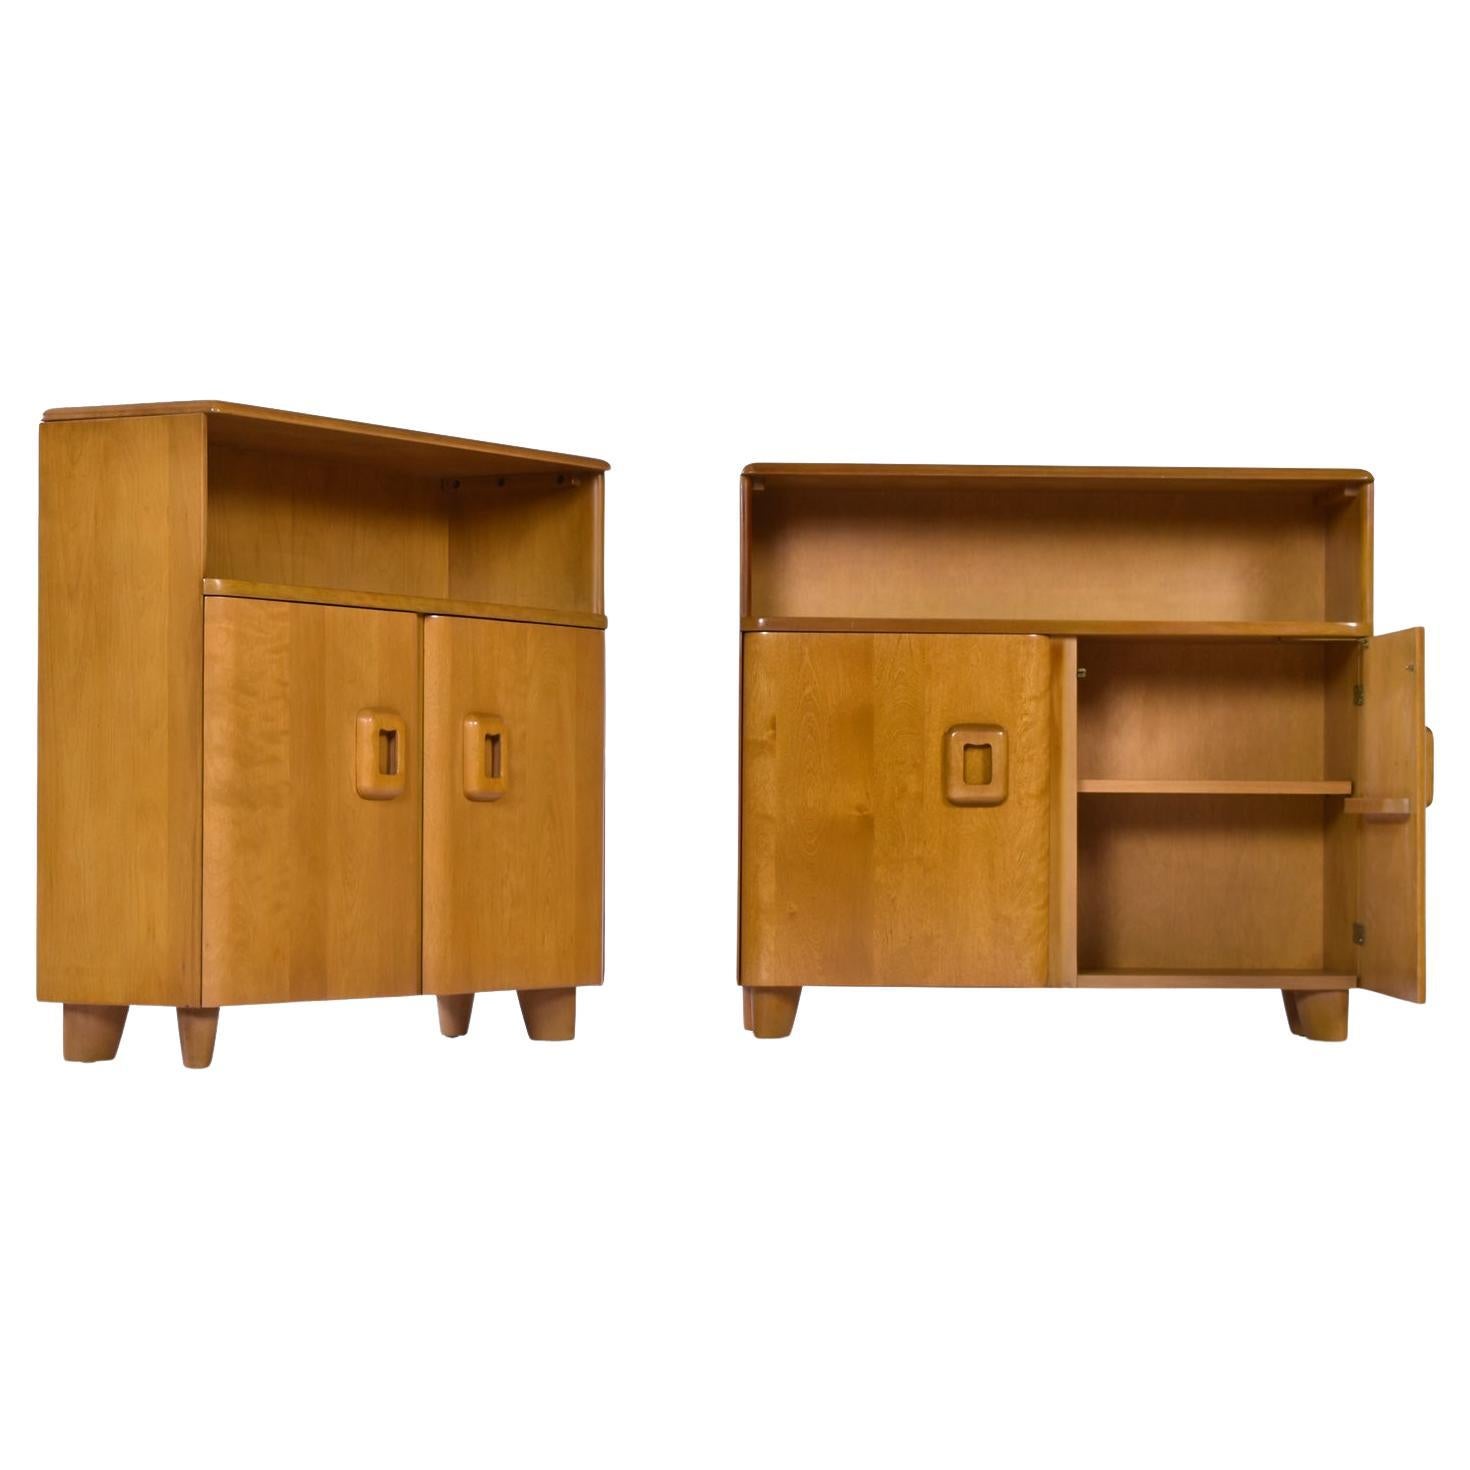 Versatility abounds with this Pair of Heywood Wakefield cabinets. Coffee bar, book case, or entryway console are just a few ideas. As a dry bar, the adjustable / removable shelf will allow you to keep that whiskey collection cozy. Flank your bed for